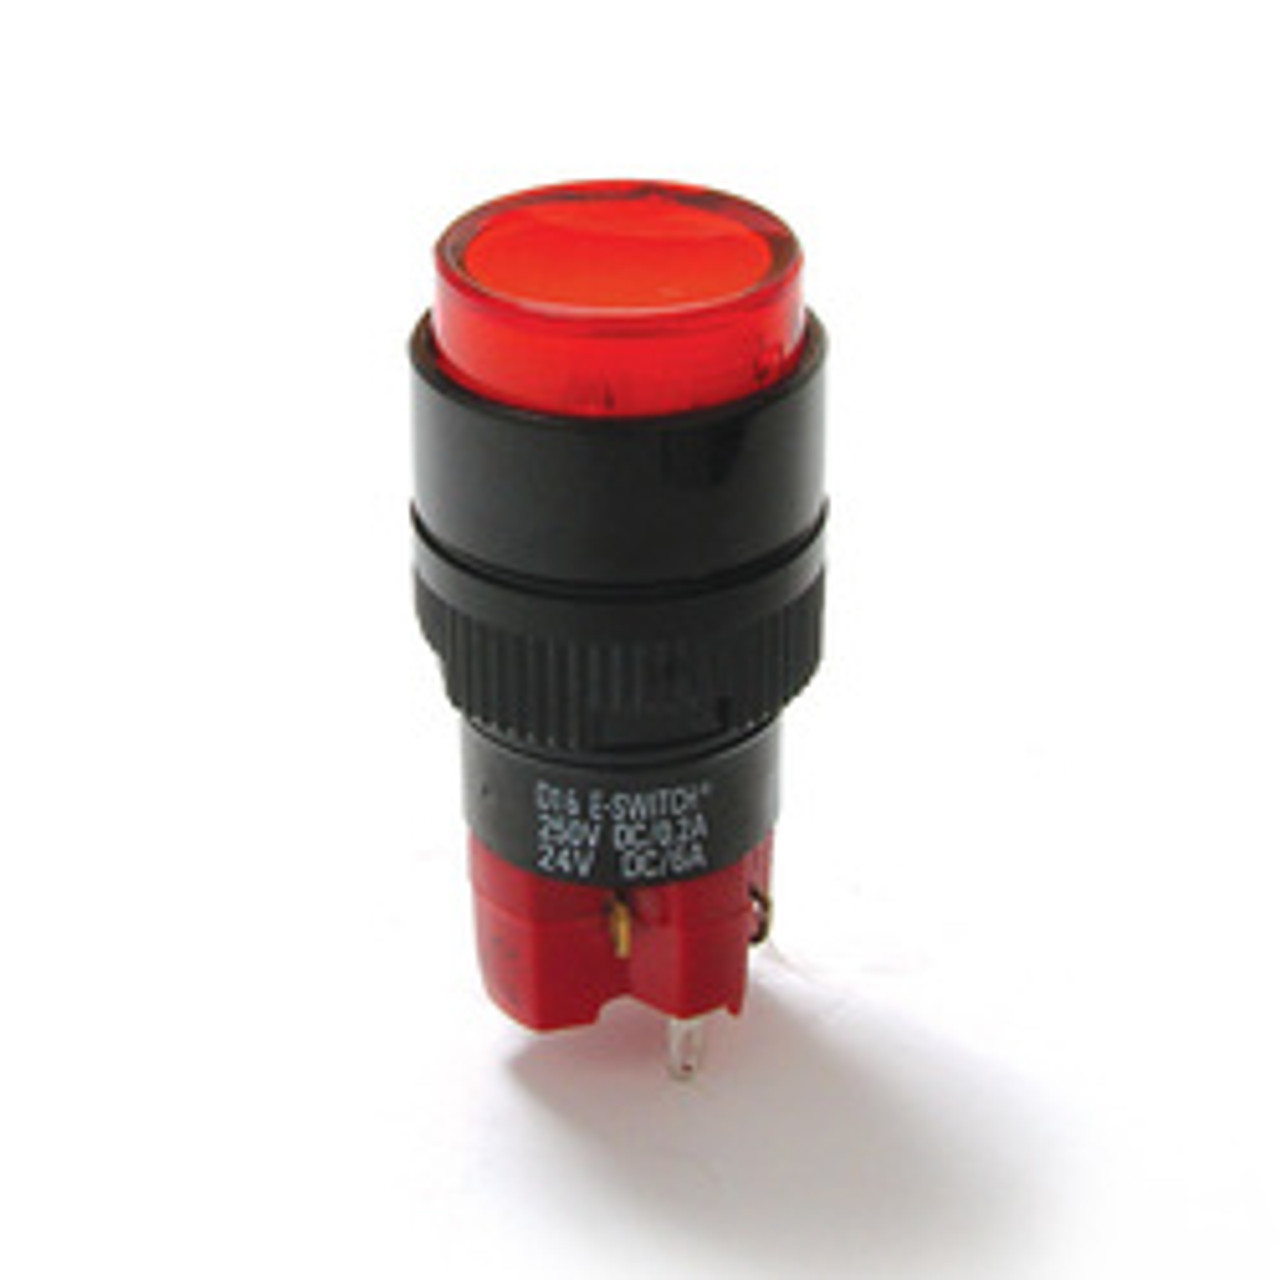 E-Switch D16OAR11ARED Pushbutton Switches